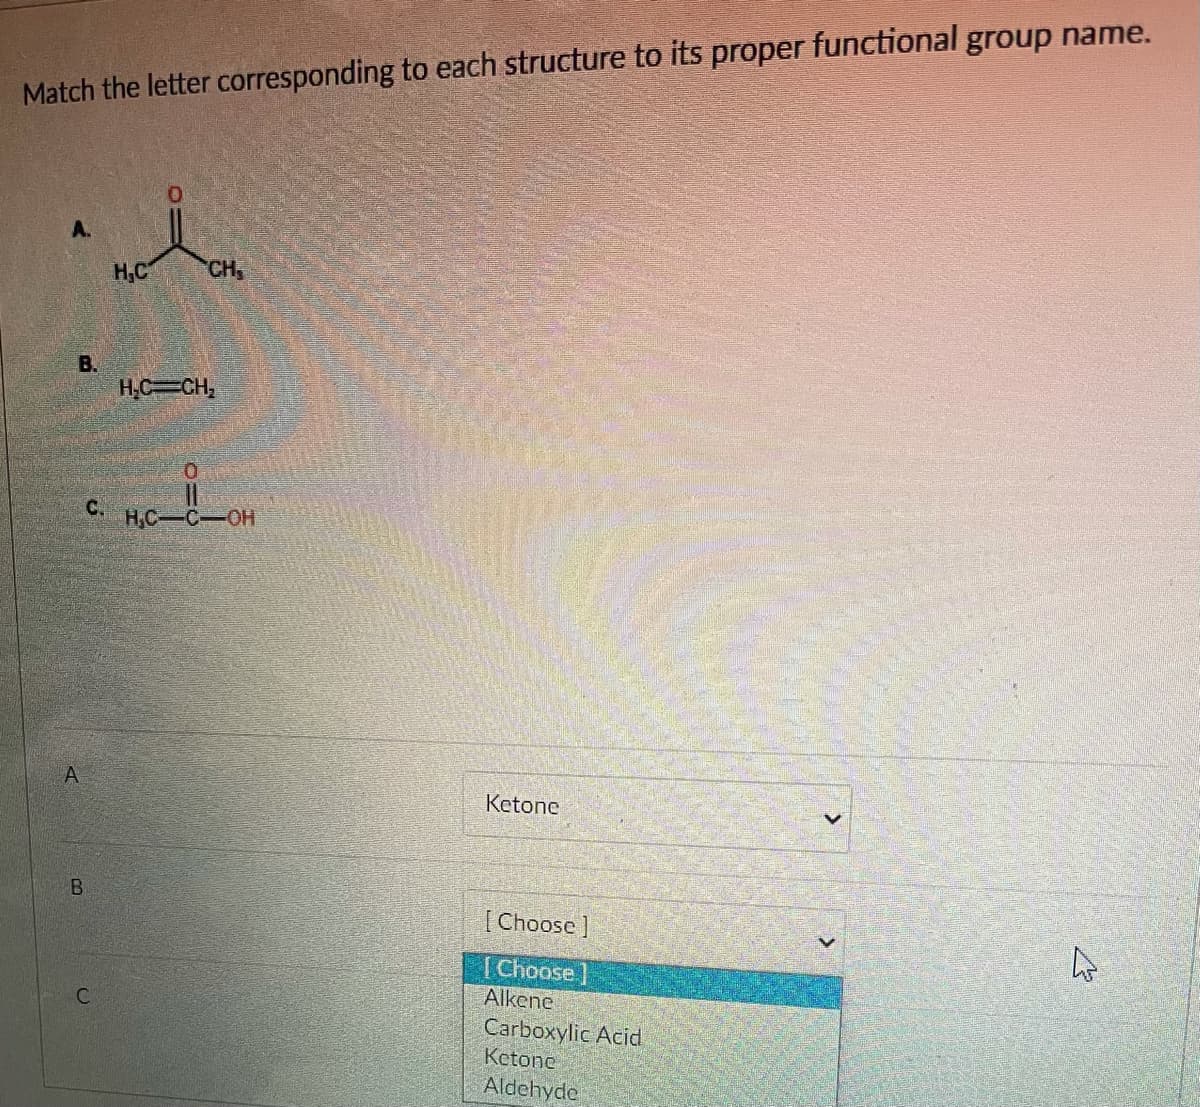 Match the letter corresponding to each structure to its proper functional group name.
A.
H,C
CH
В.
H.C CH,
C.
HC-C-OH
Ketone
[ Choose ]
[Choose]
Alkene
Carboxylic Acid
Ketone
Aldehyde
